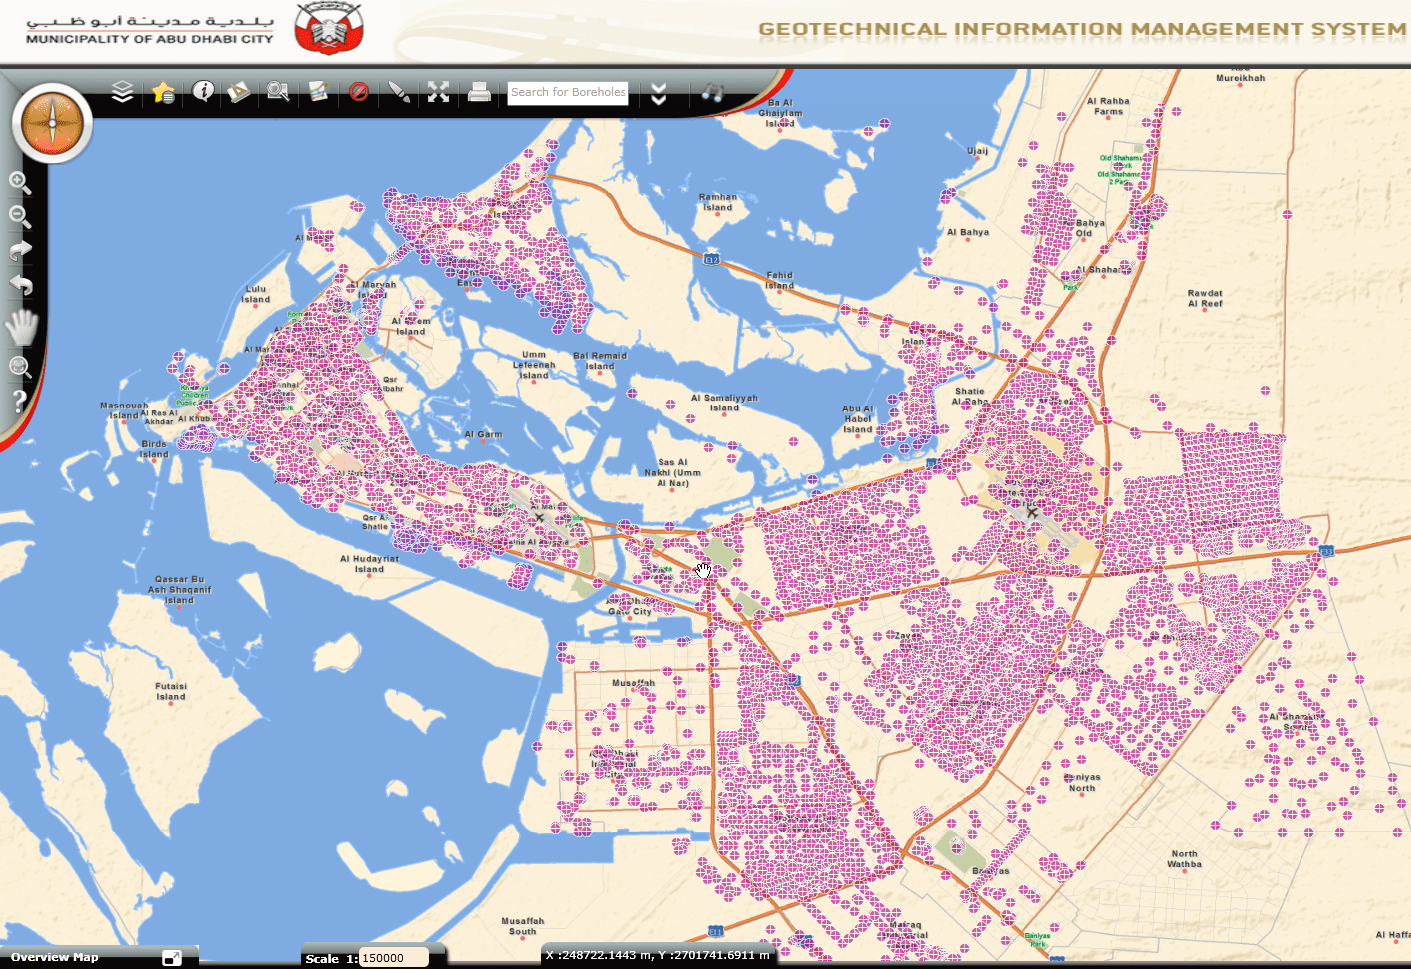 The Geotechnical Information Management System (GIMS) provides easy access to data for all boreholes around Abu Dhabi.